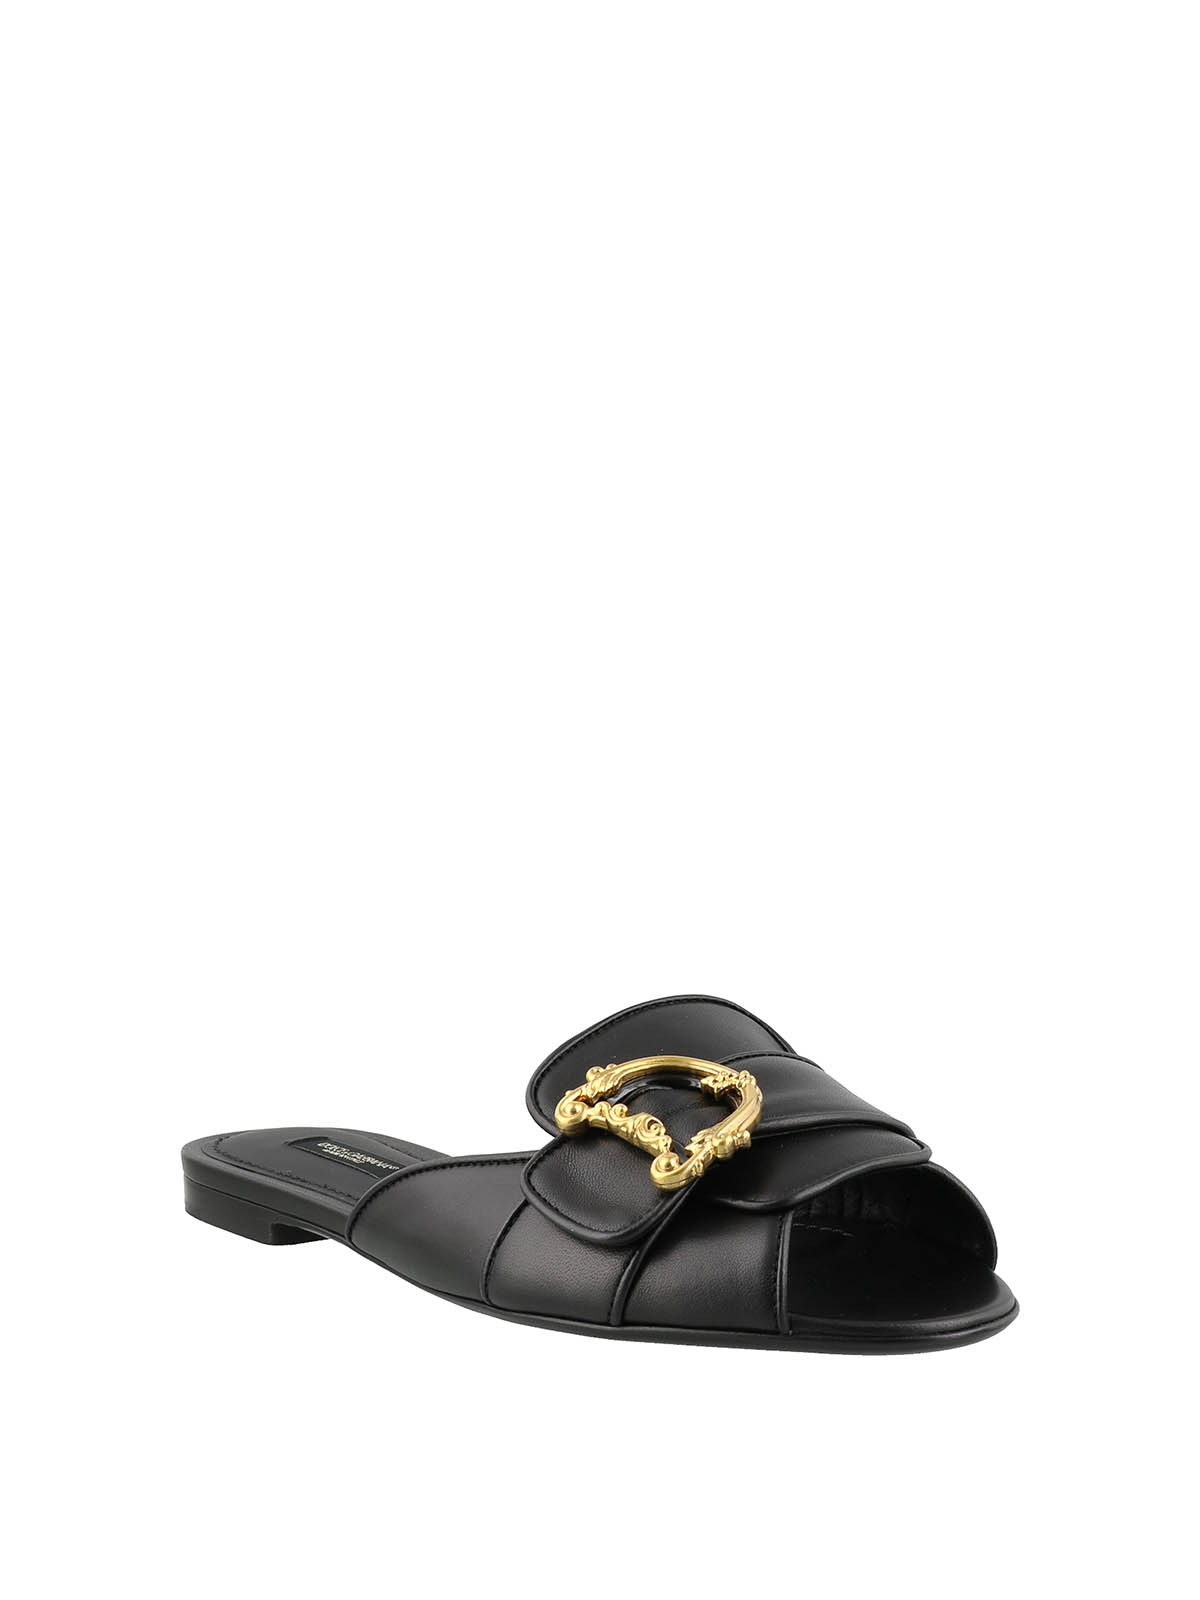 Sandals Dolce & Gabbana - Leather sandals with baroque D&G logo -  CQ0324AX19180999